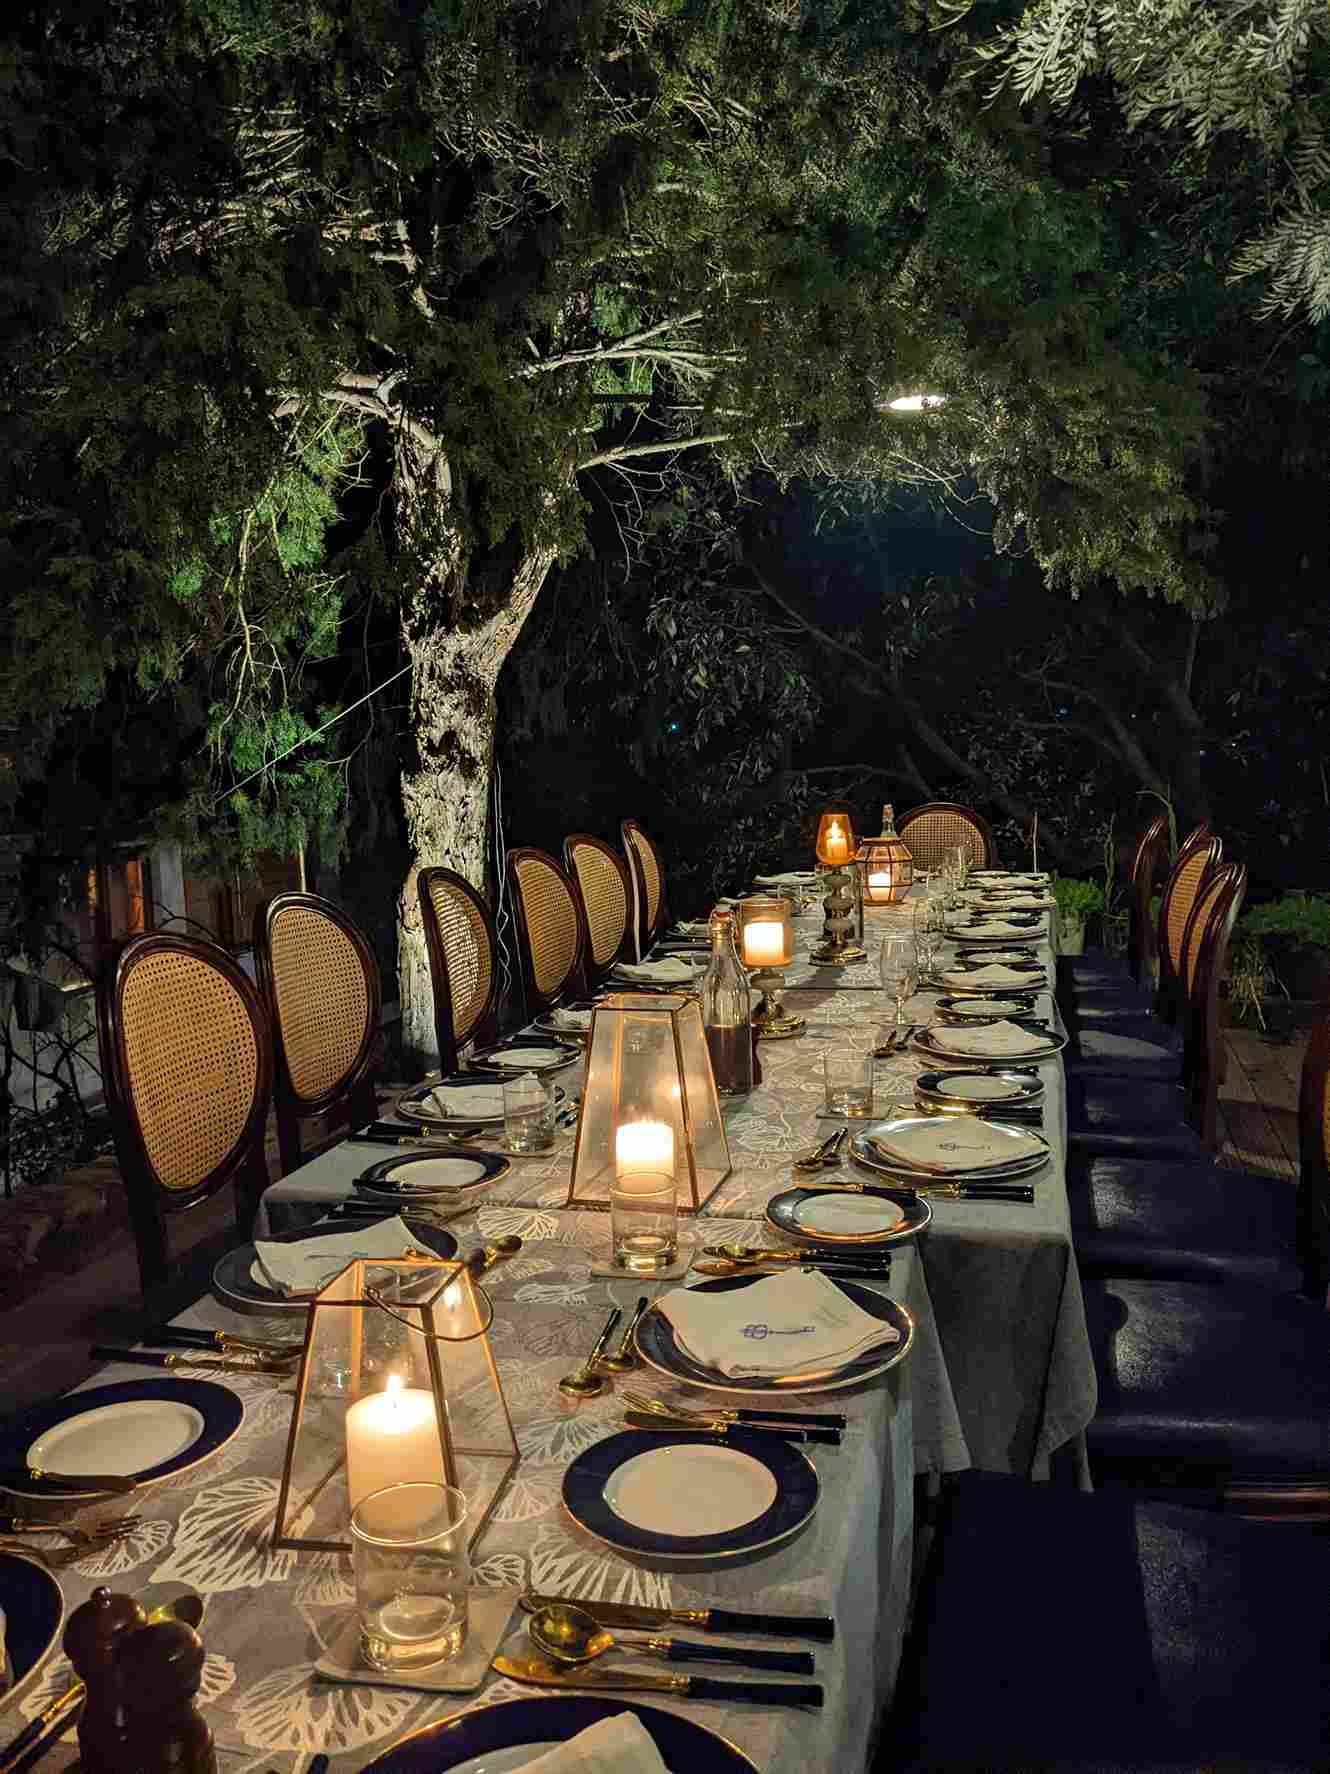 Dinners at Gethia are a beautiful affair near the poolside or under the stars.